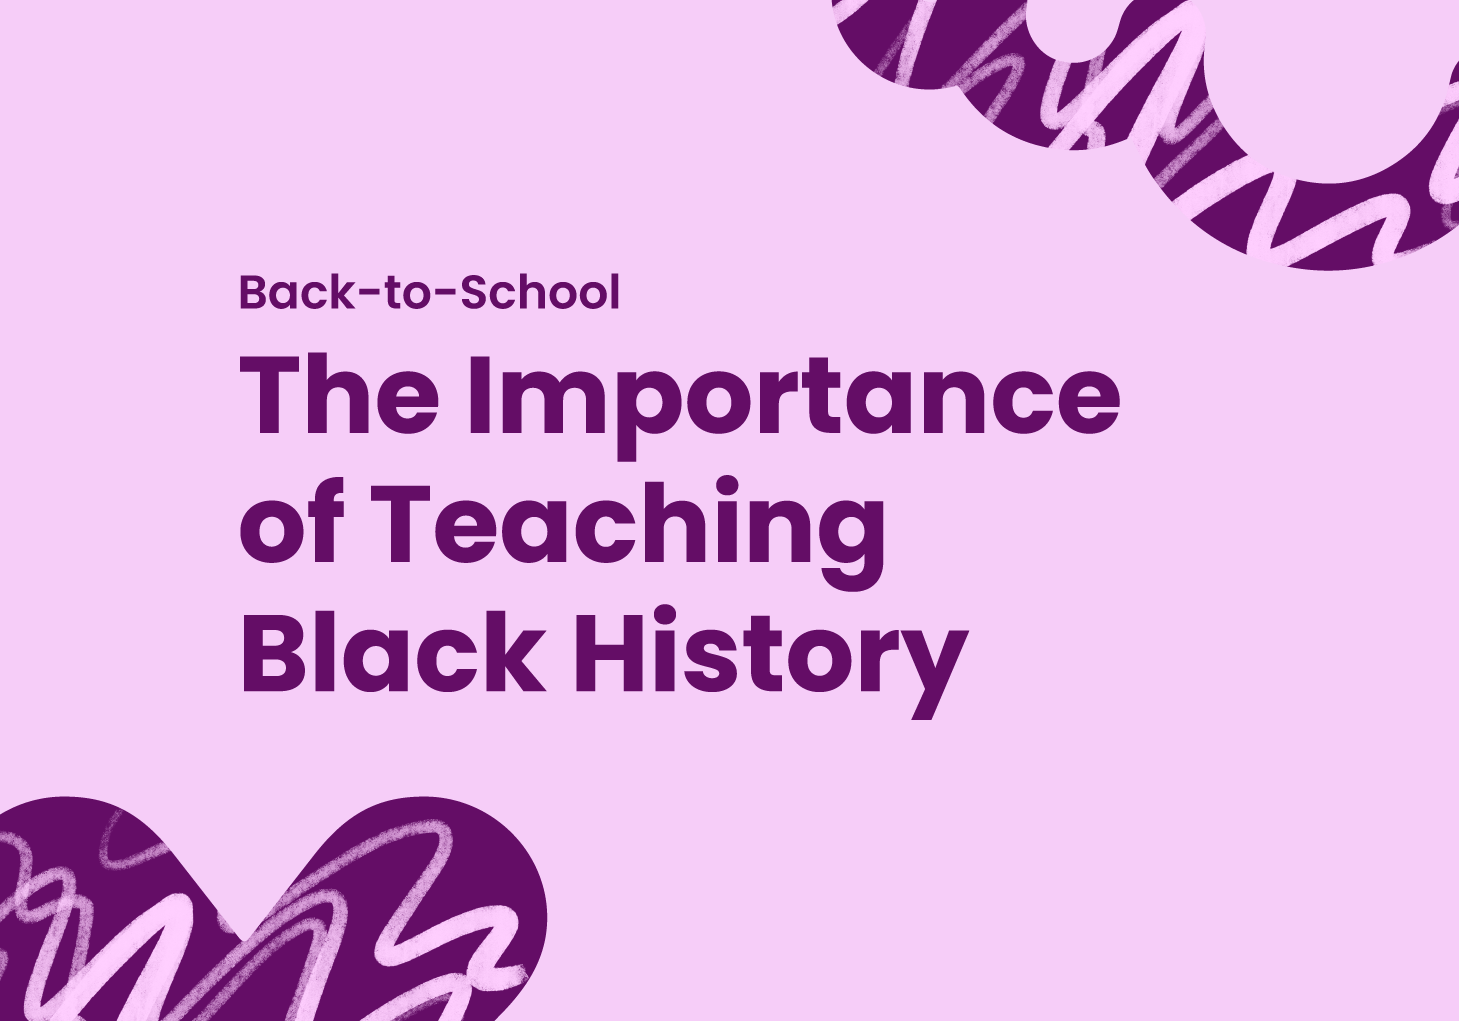 Back-to-School: The Importance of Teaching Black History